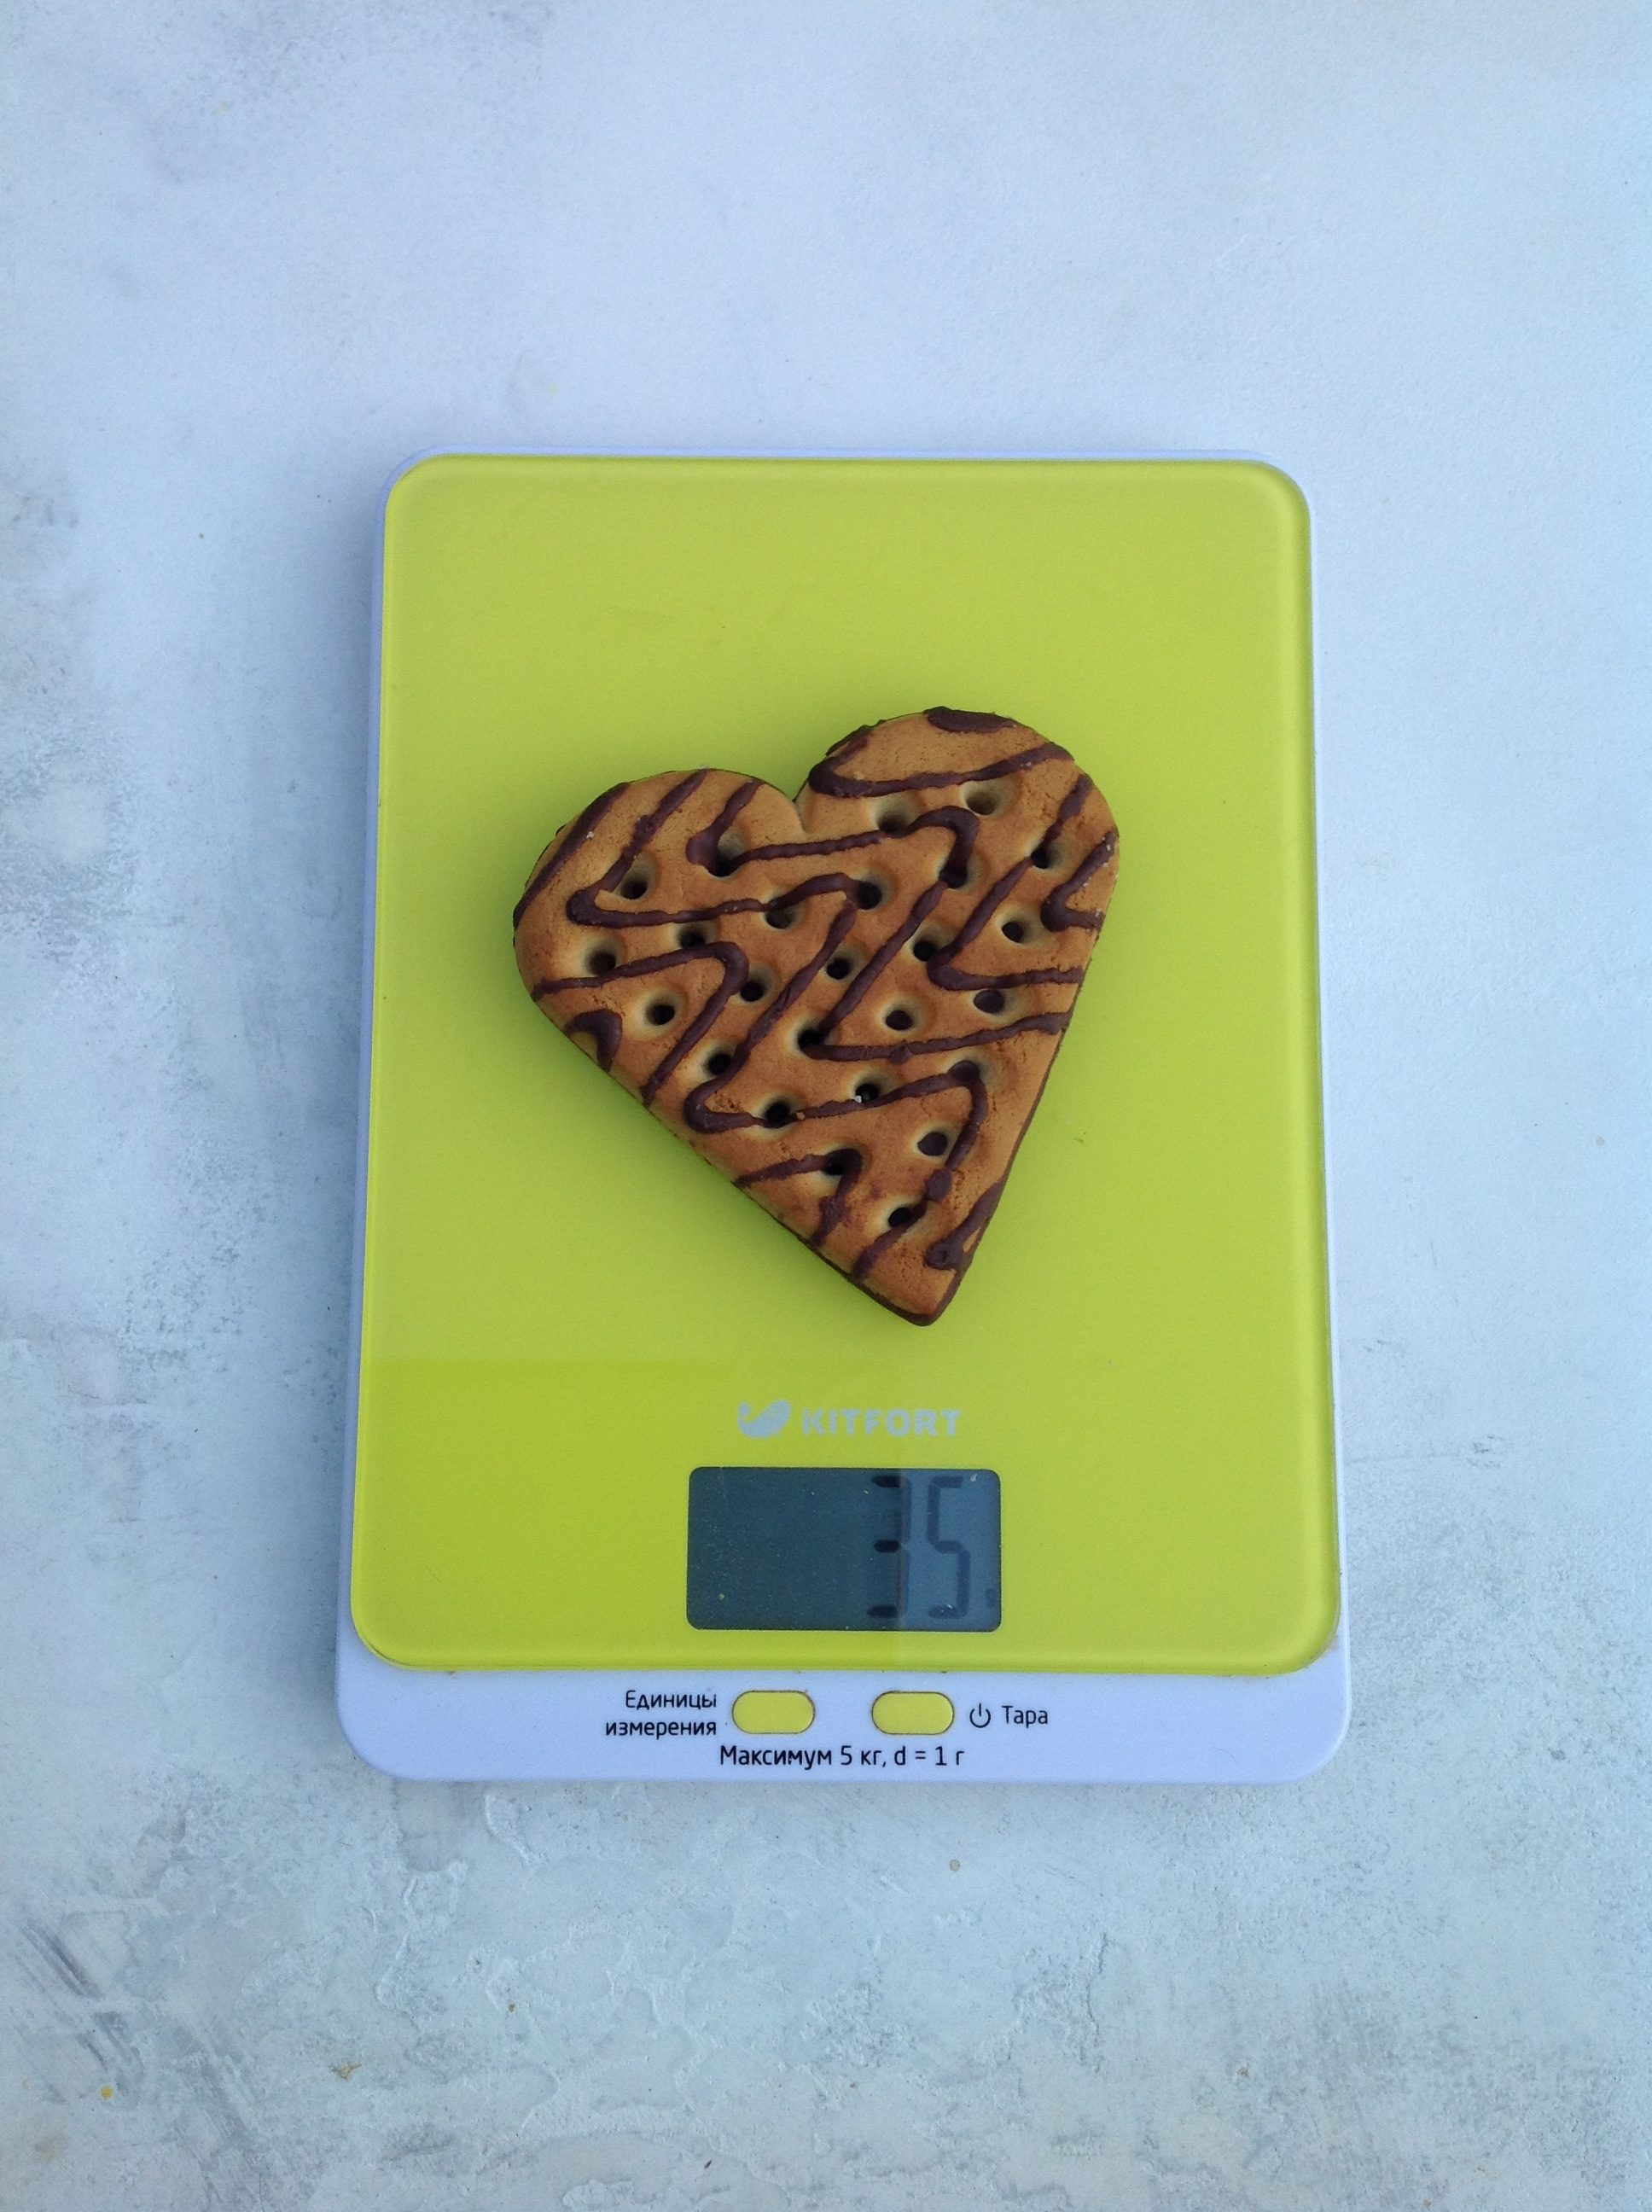 the weight of a chocolate-covered heart biscuit